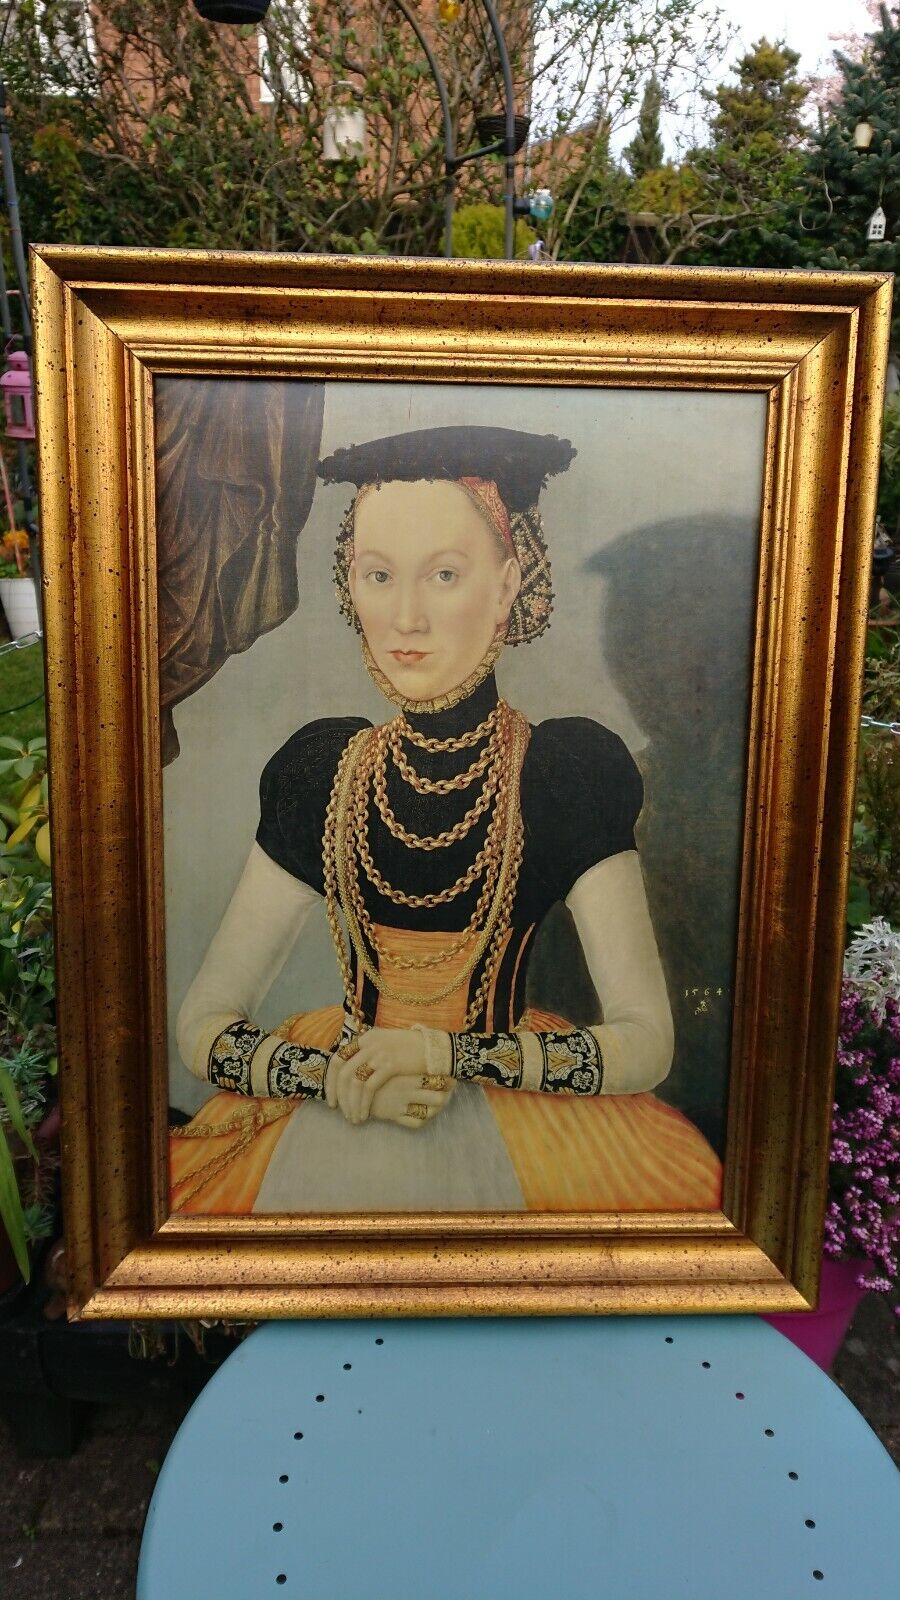 A Fabulous Ecclesiastical Style Print of a Lady of Nobility in Ornate Gilt Frame